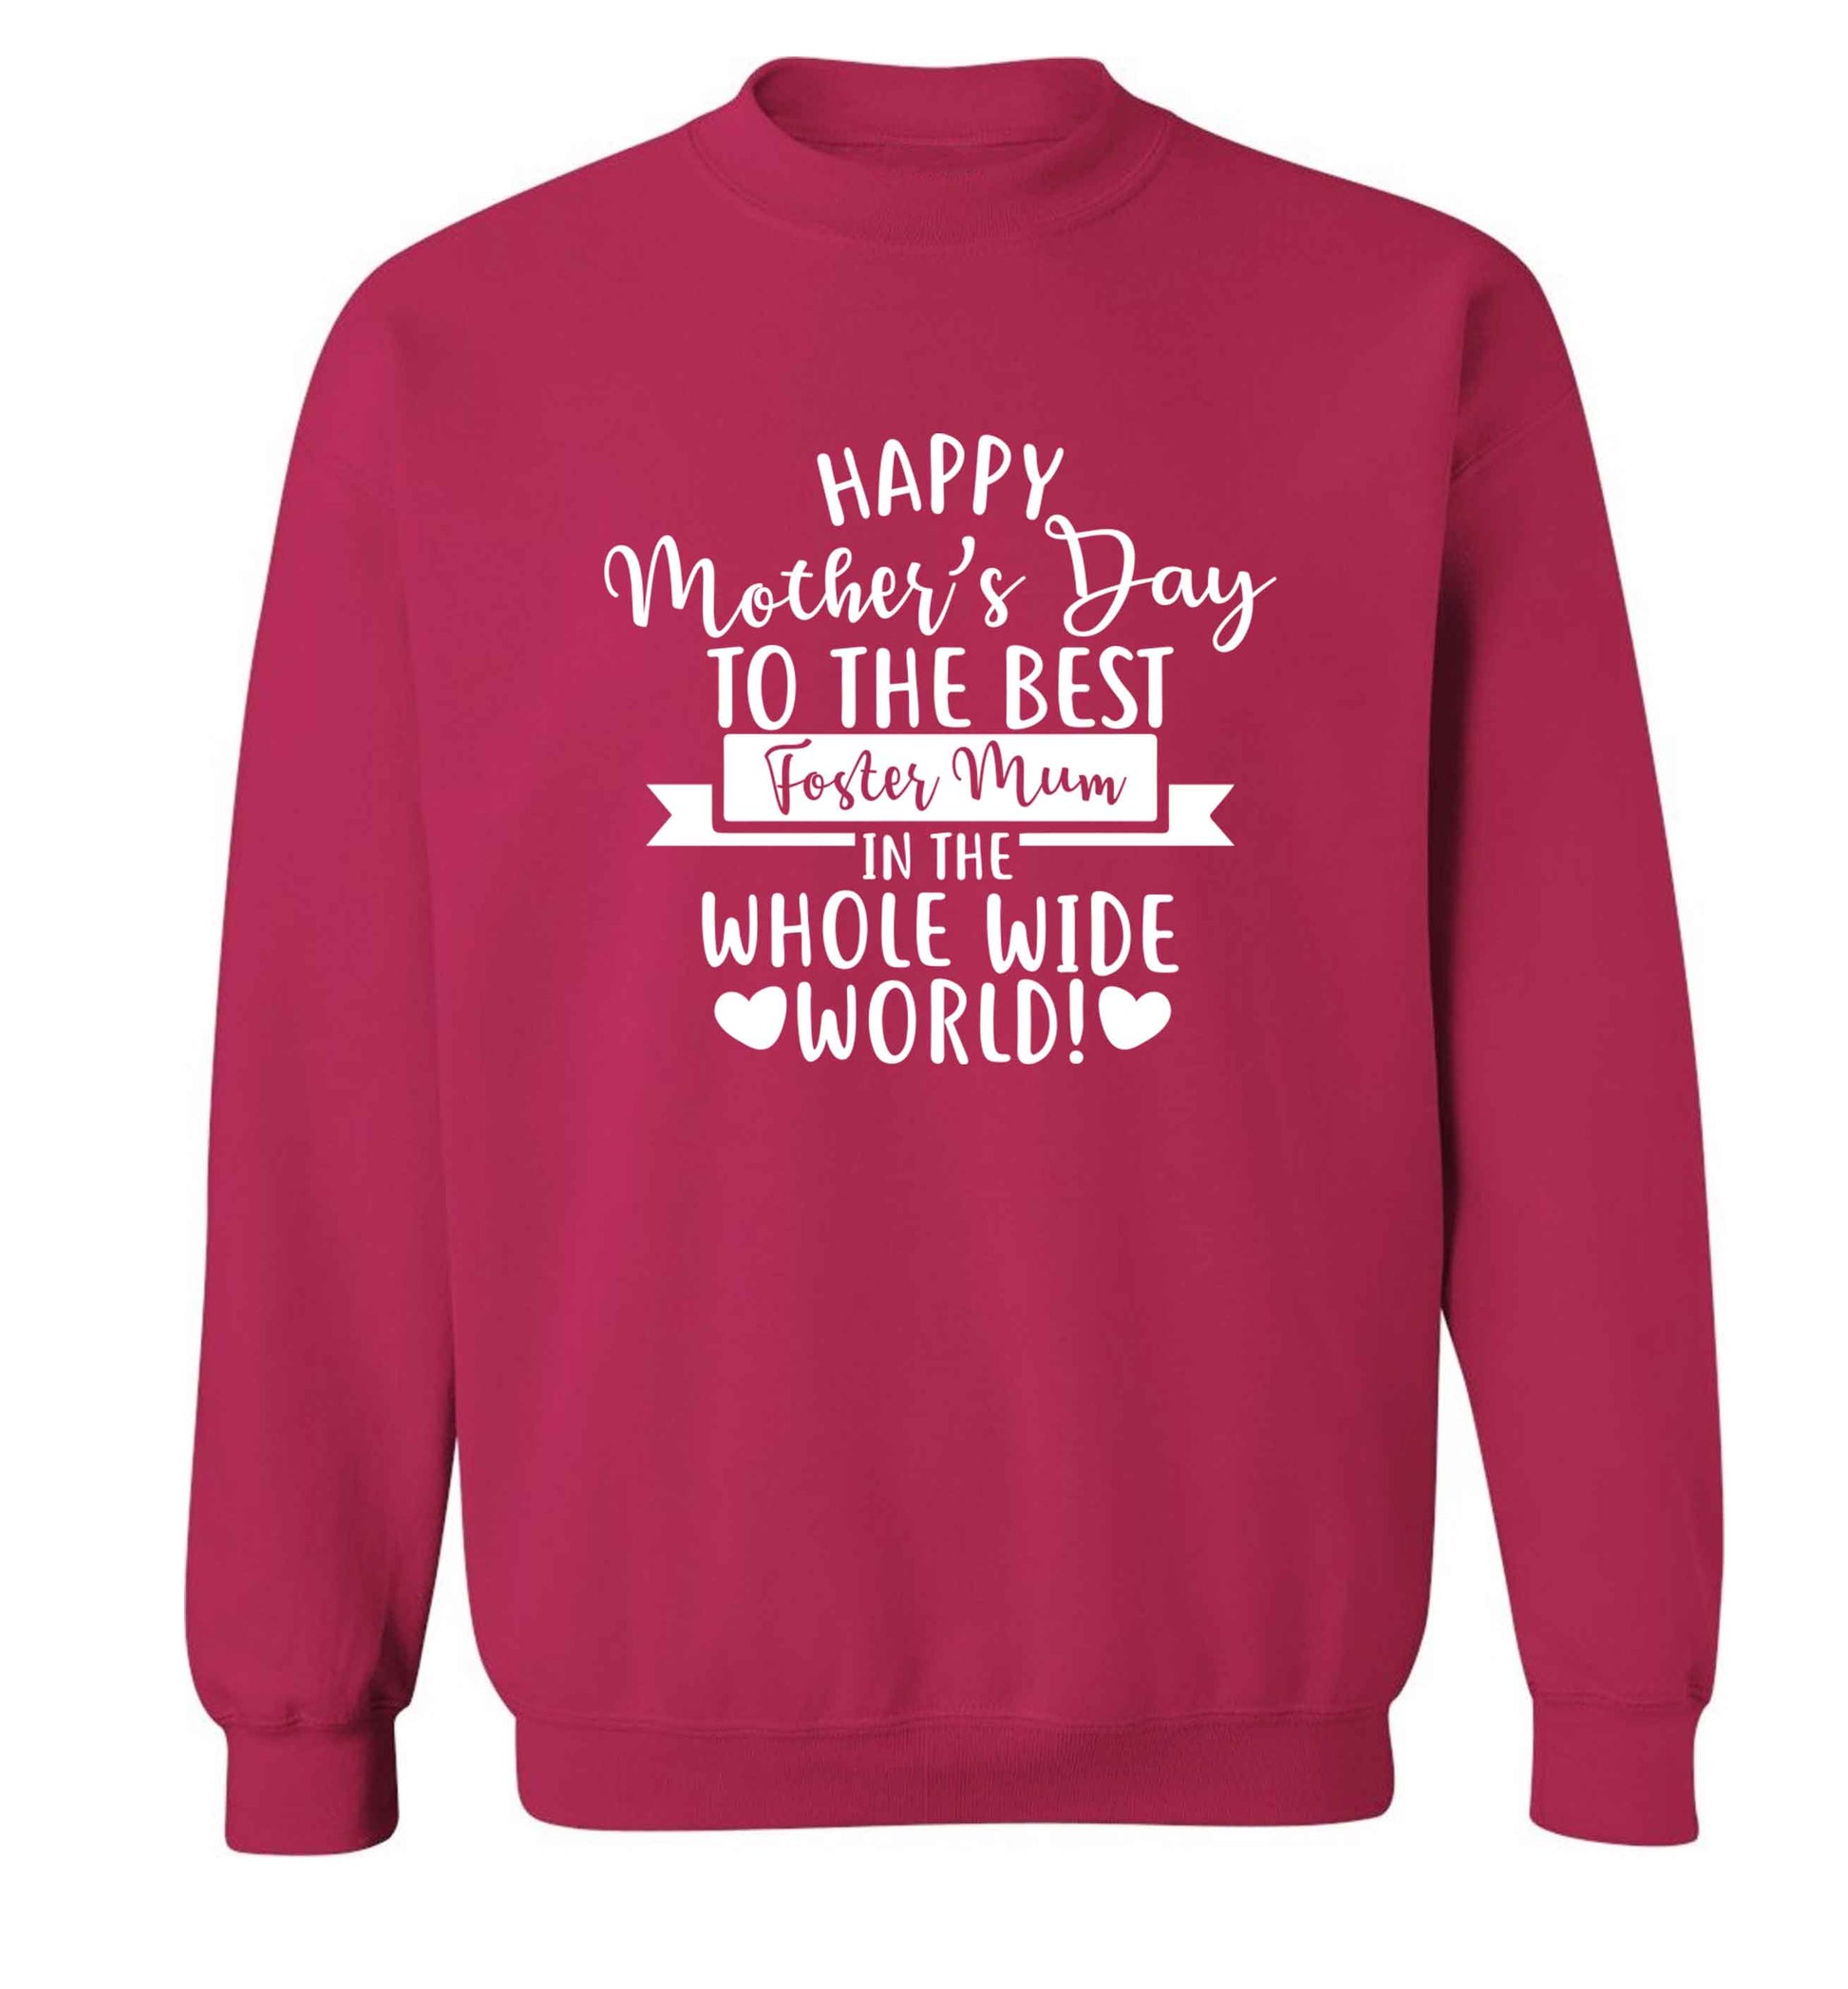 Happy mother's day to the best foster mum in the world adult's unisex pink sweater 2XL